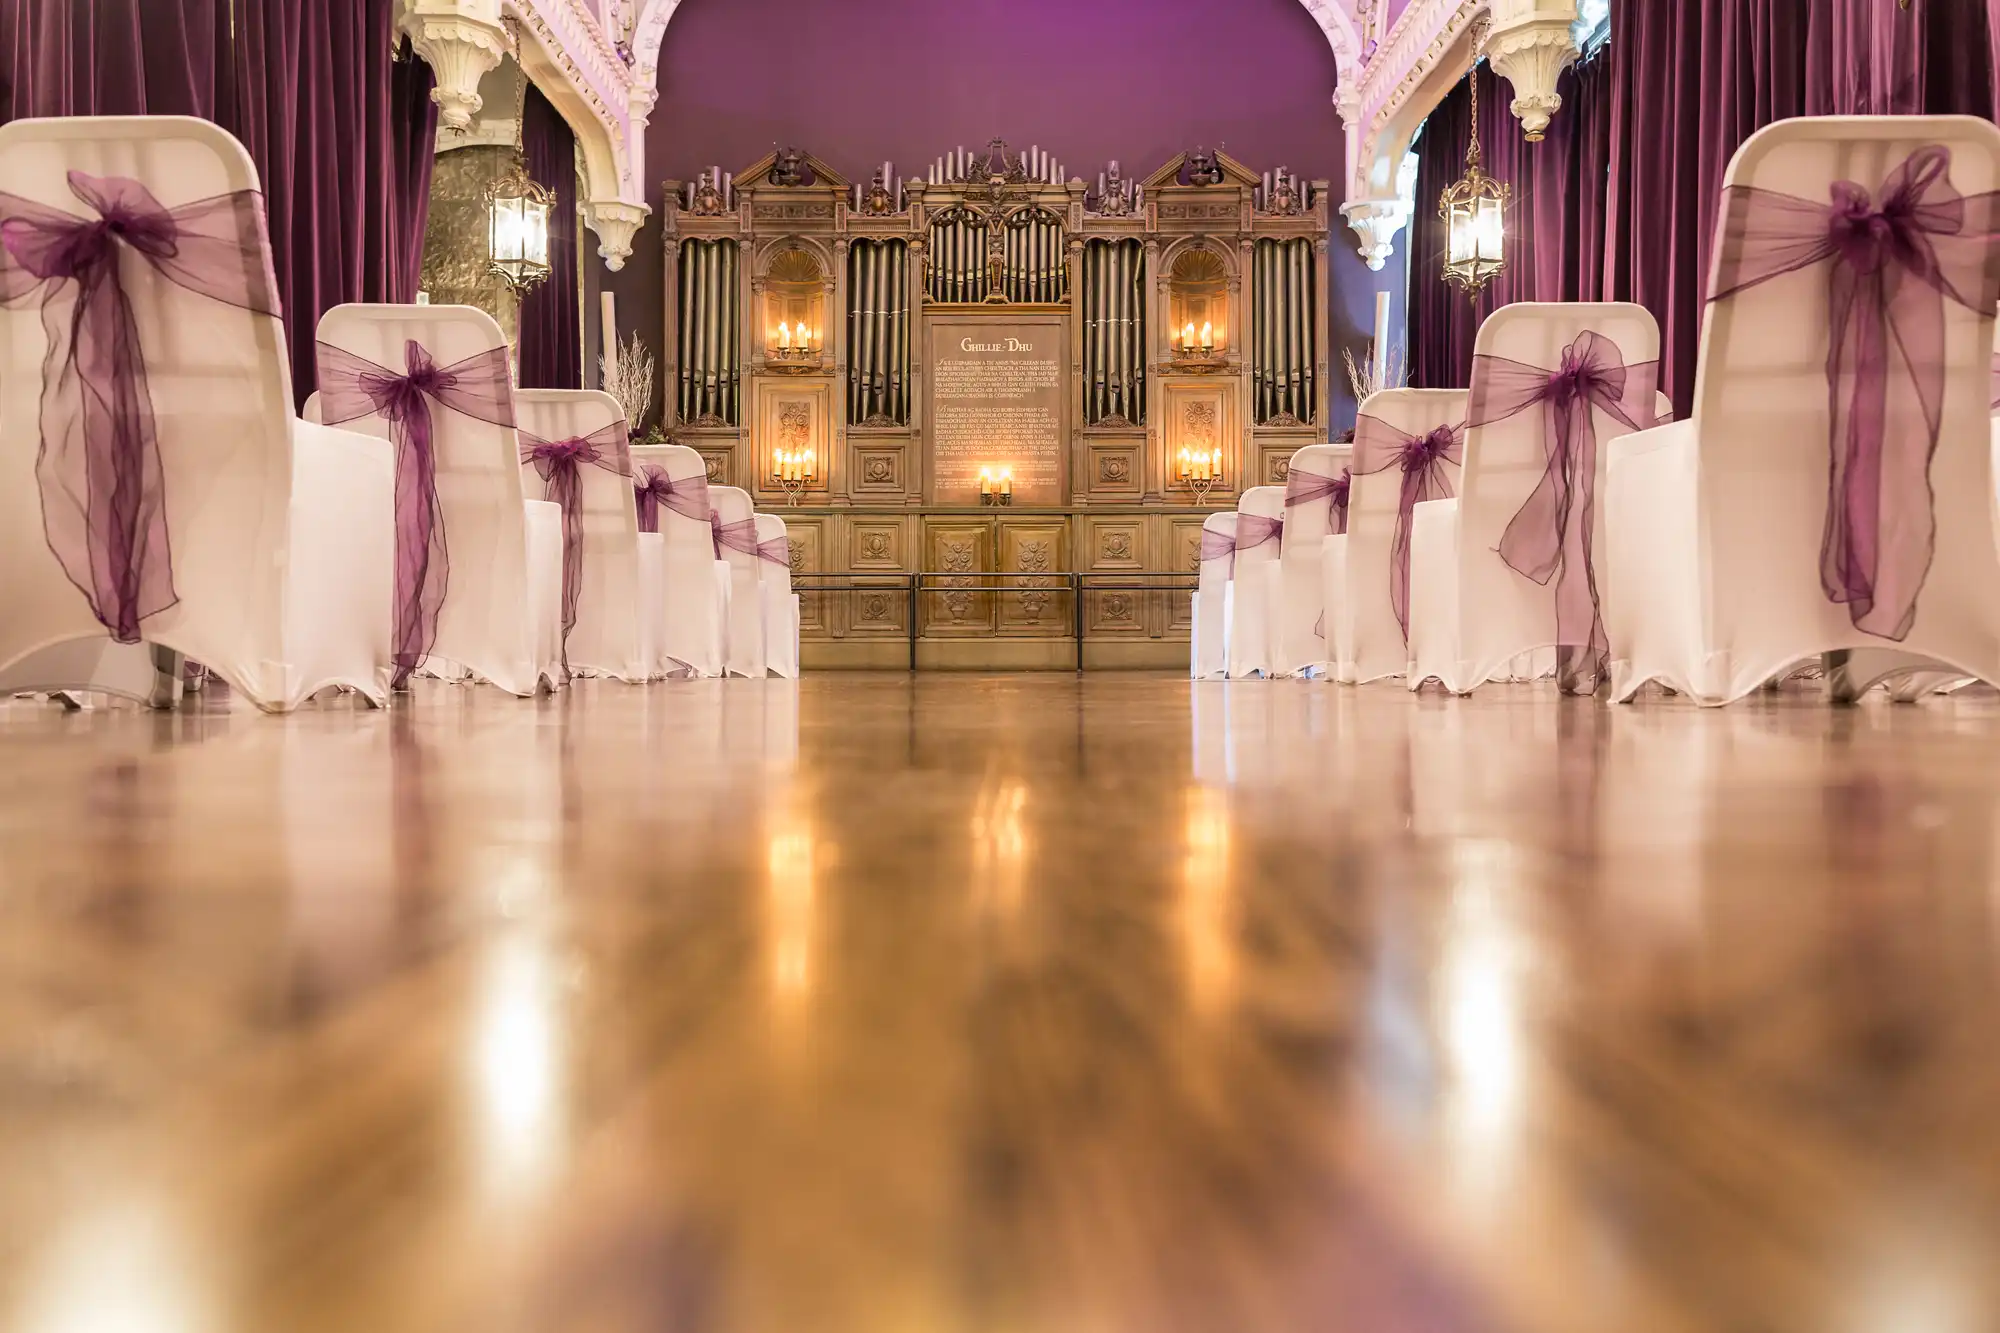 Elegant wedding venue interior with white chairs adorned with purple ribbons and a large, ornate organ at the front illuminated by soft lighting.